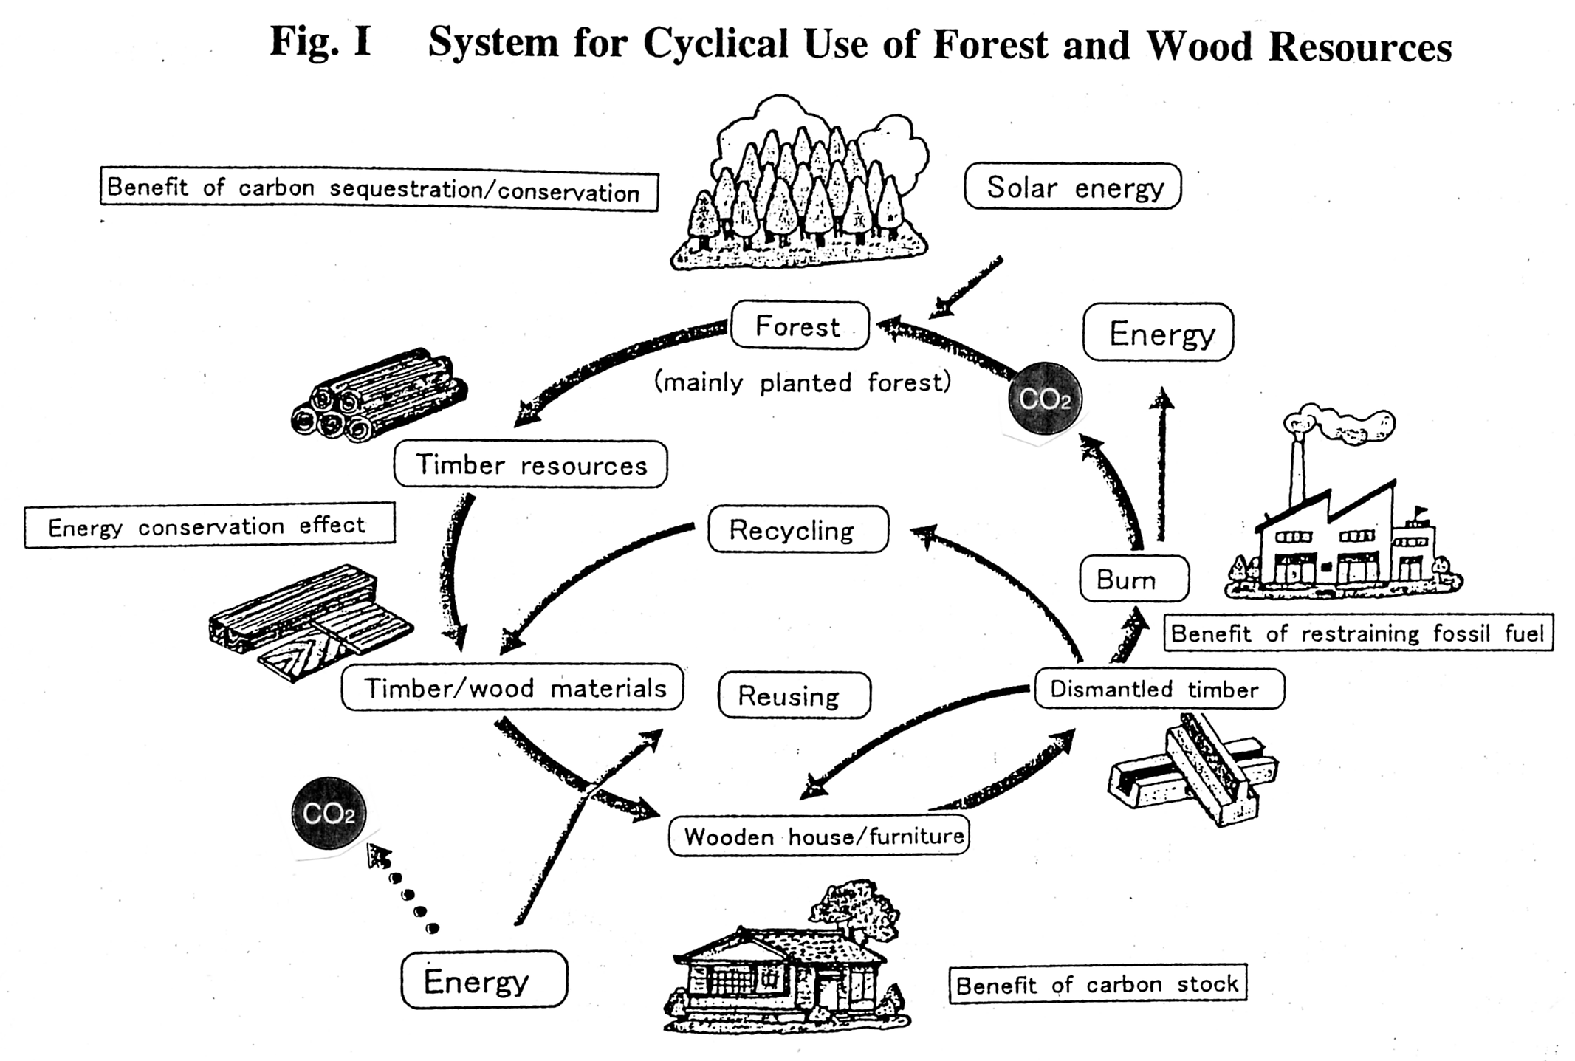 System for Cyclical Use of Forest and Wood Resources